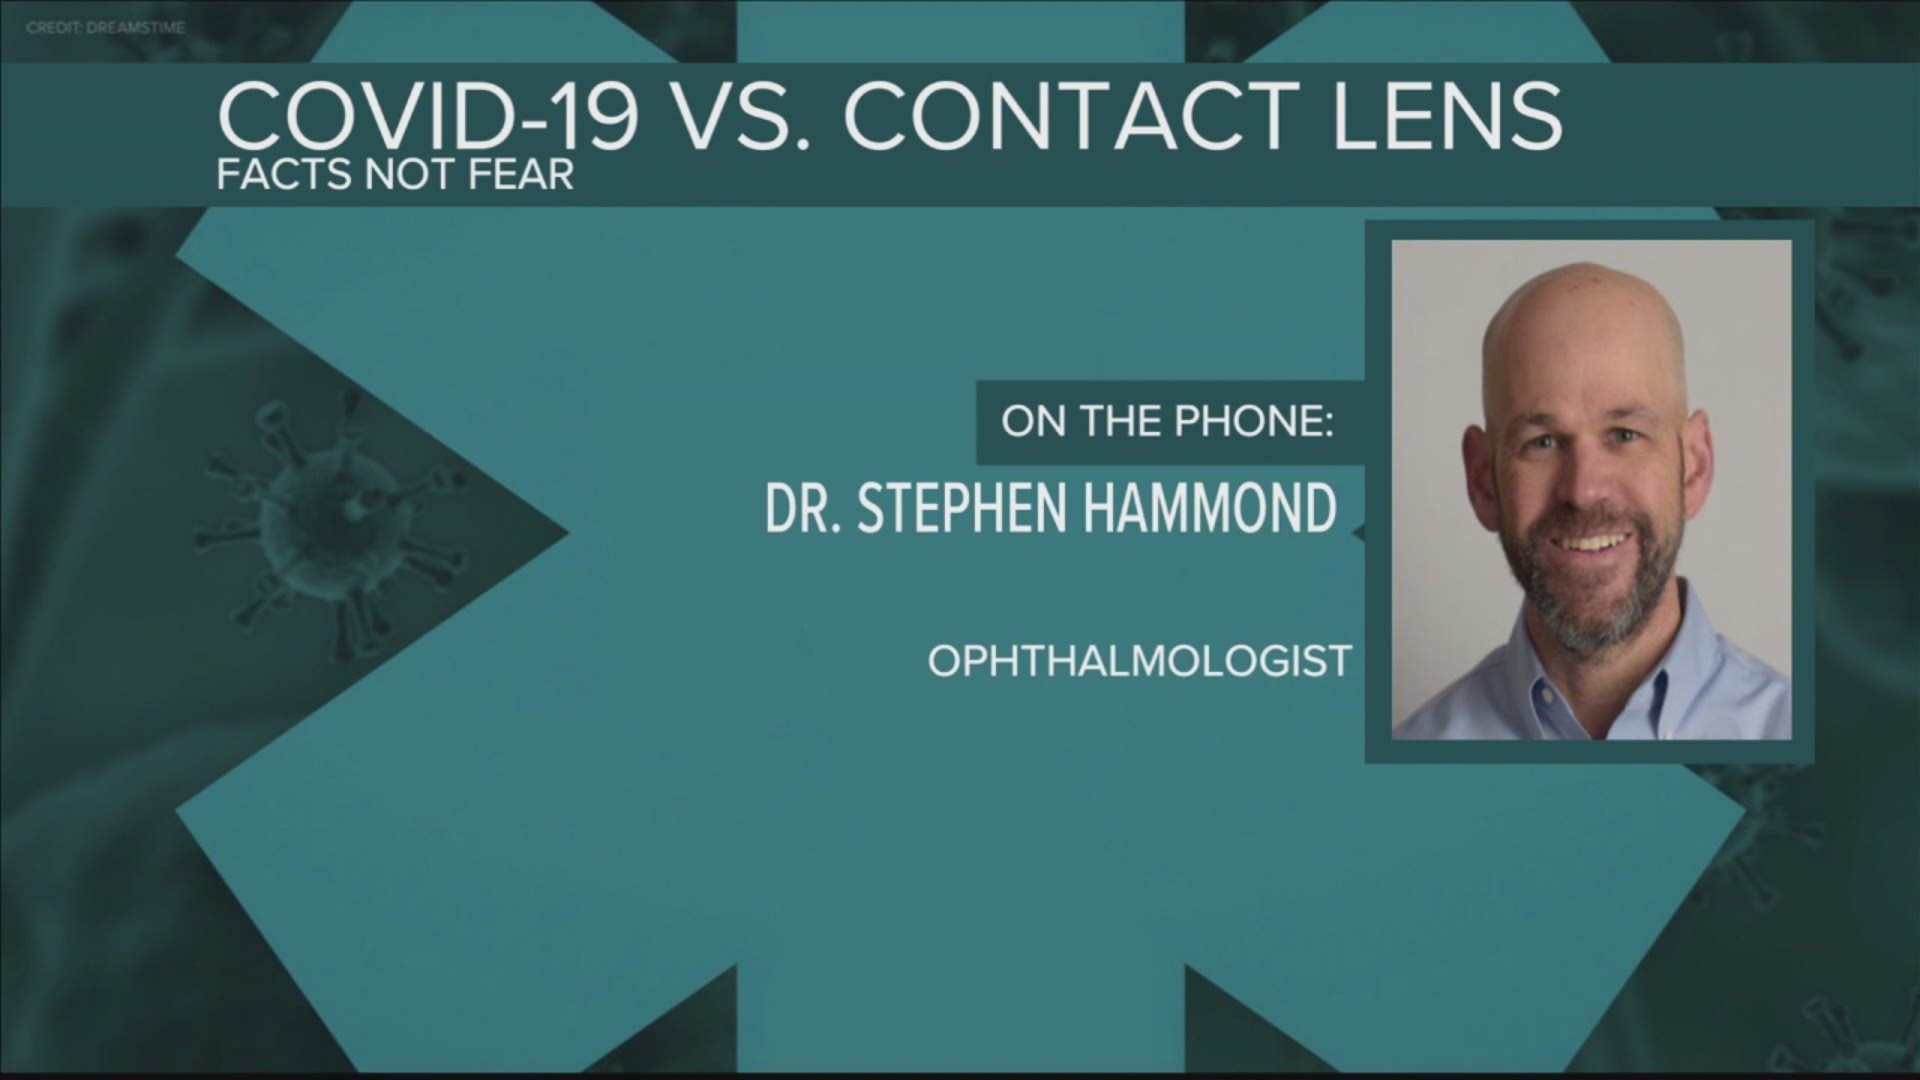 Contact lens wearers are warned to be careful as we all deal with the COVID-19 outbreak